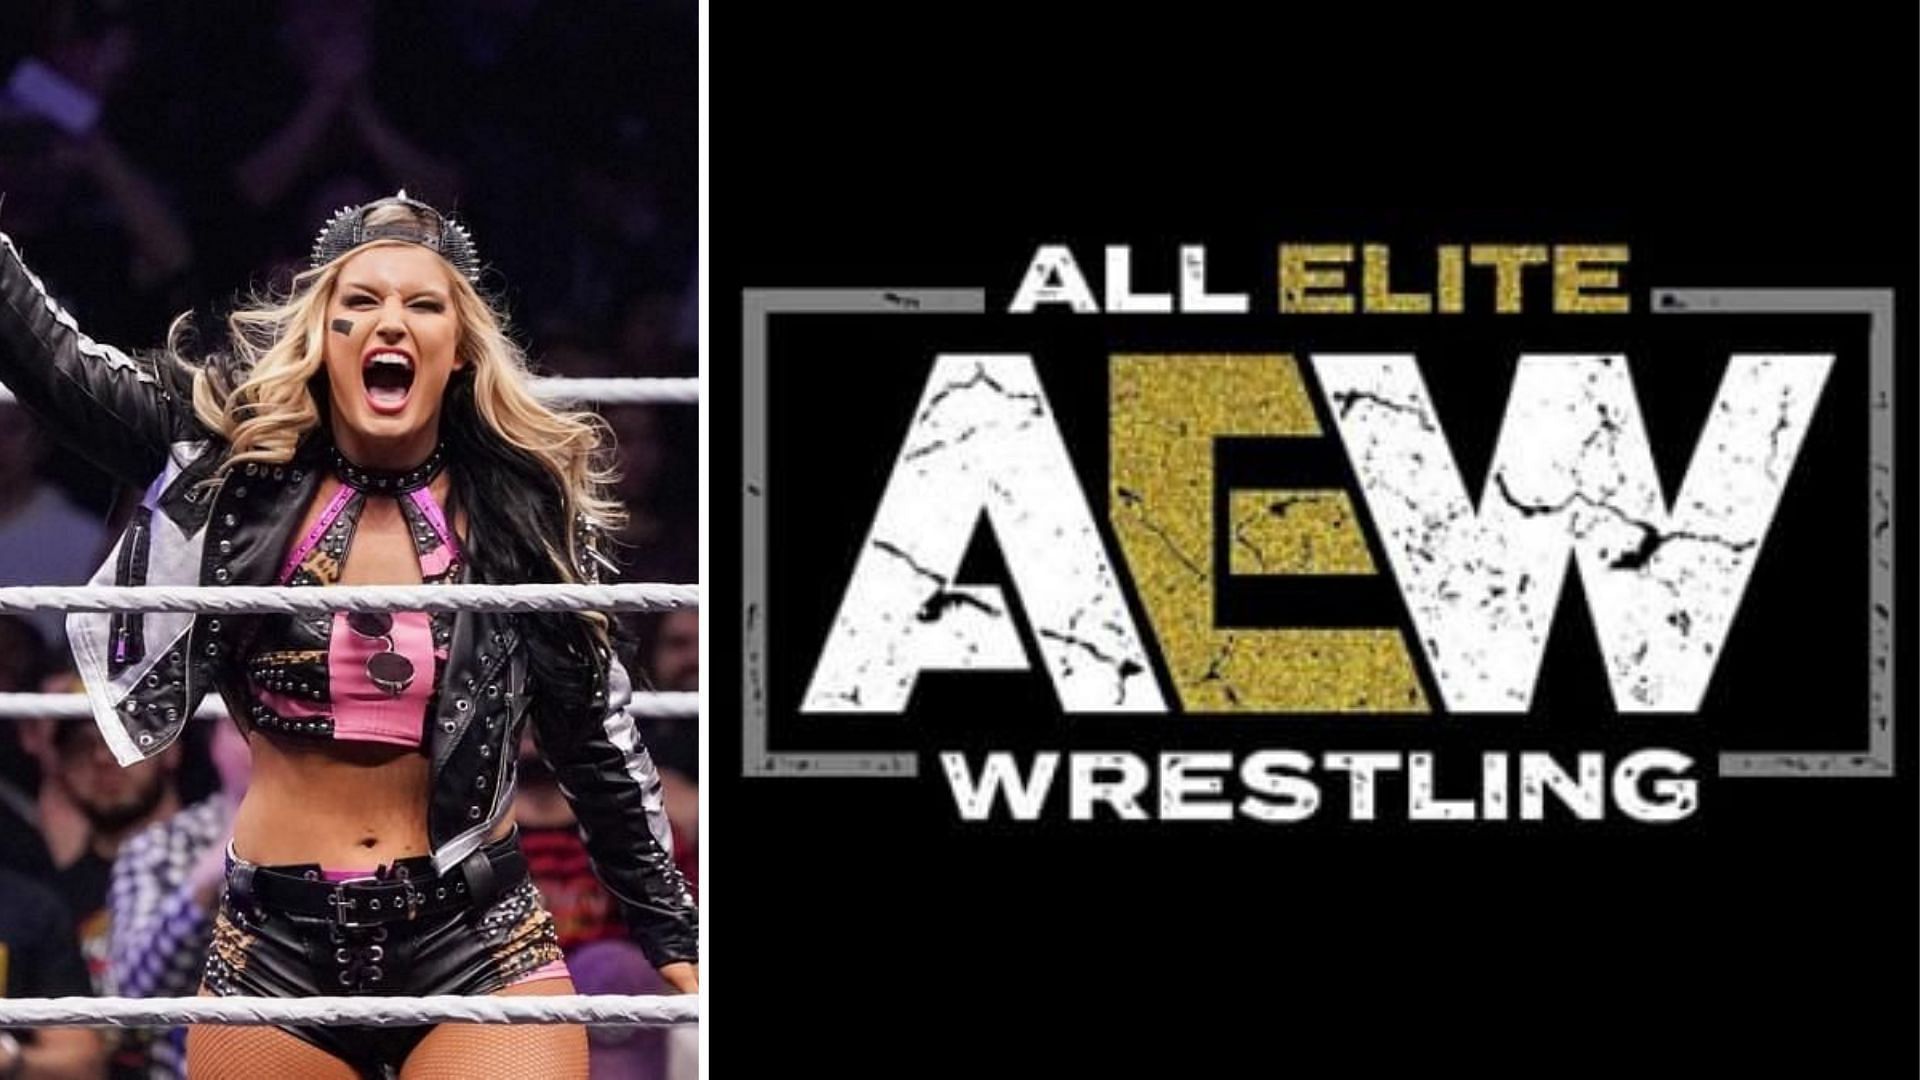 Many fans want Toni Storm in AEW